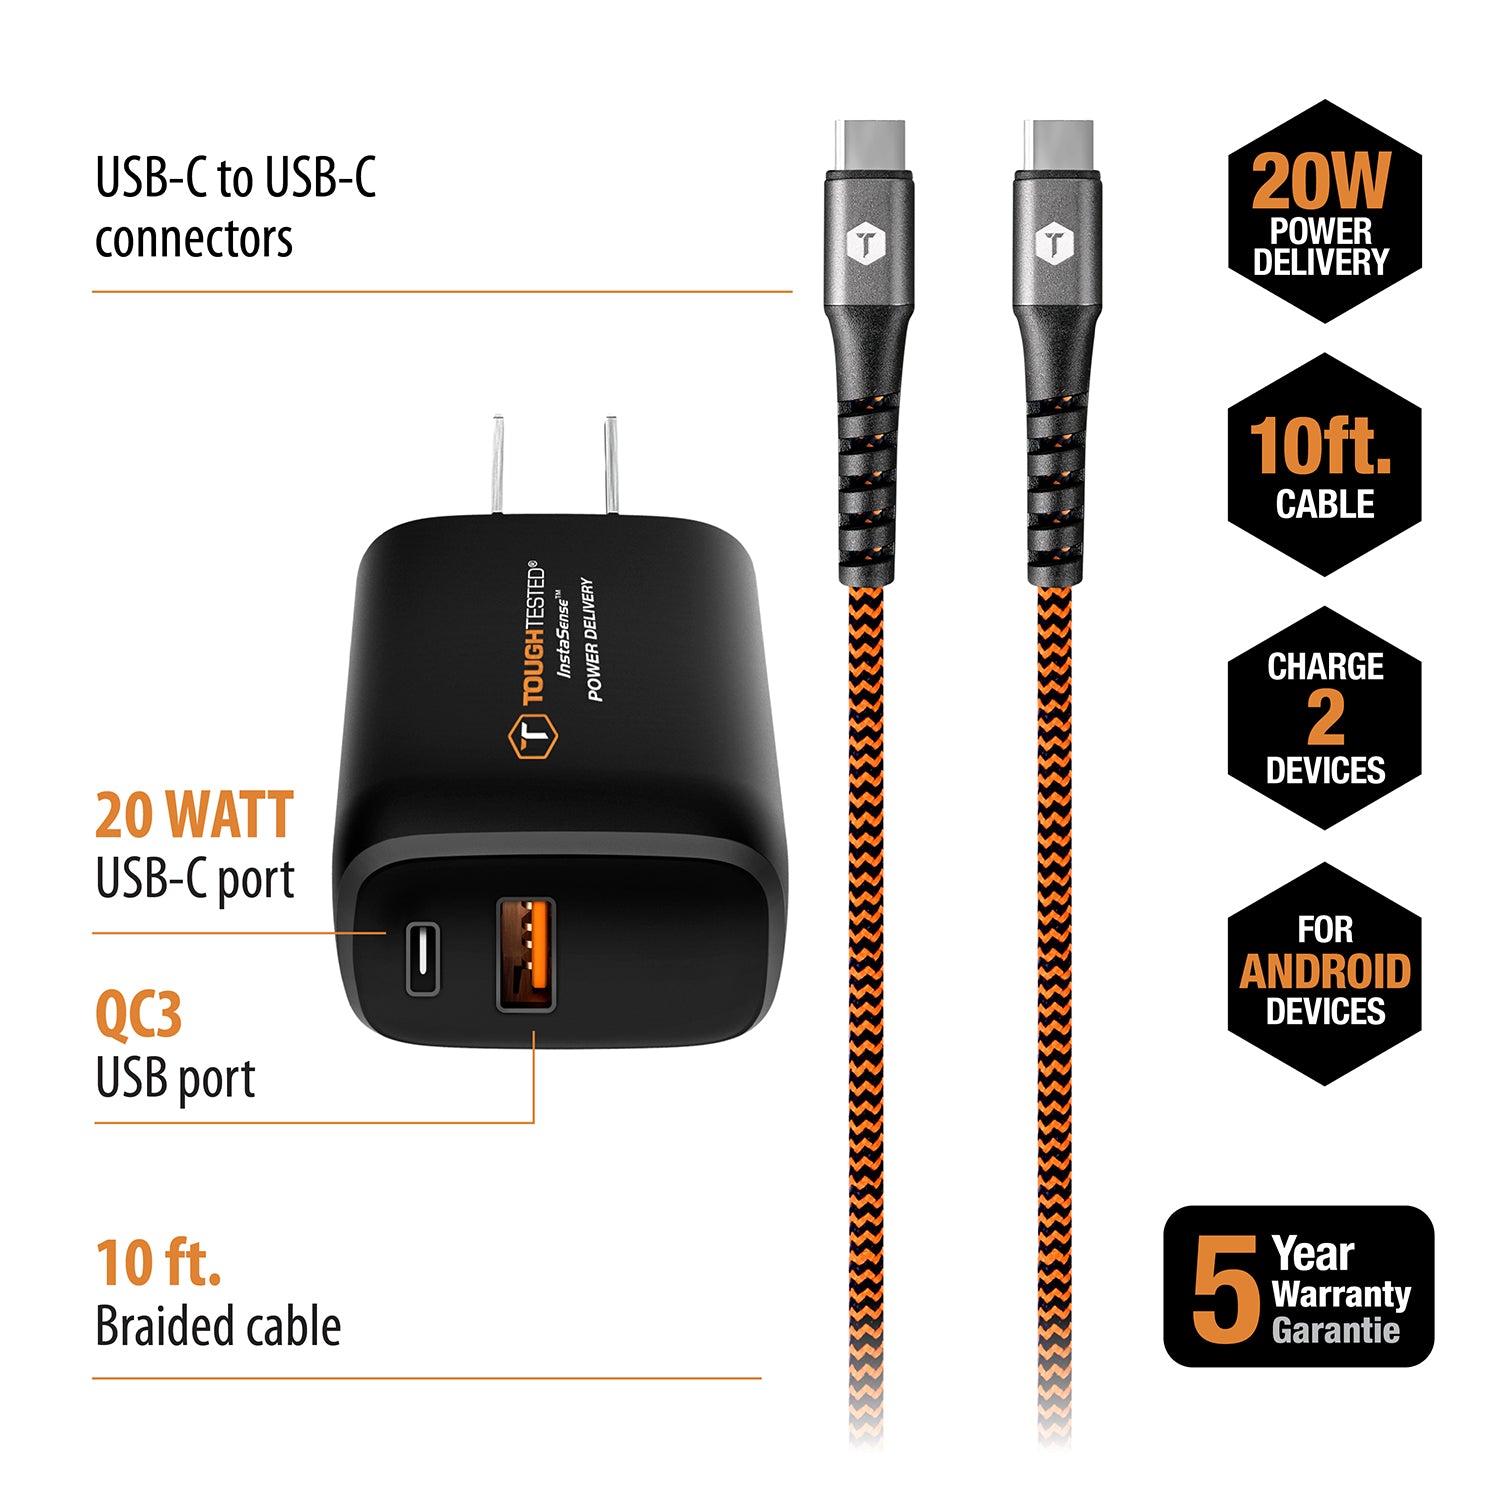 PD High Speed Wall Charger Kit with 20W USB-C + USB-A QC 3.0 Ports and 10ft USB-C to USB-C Cable